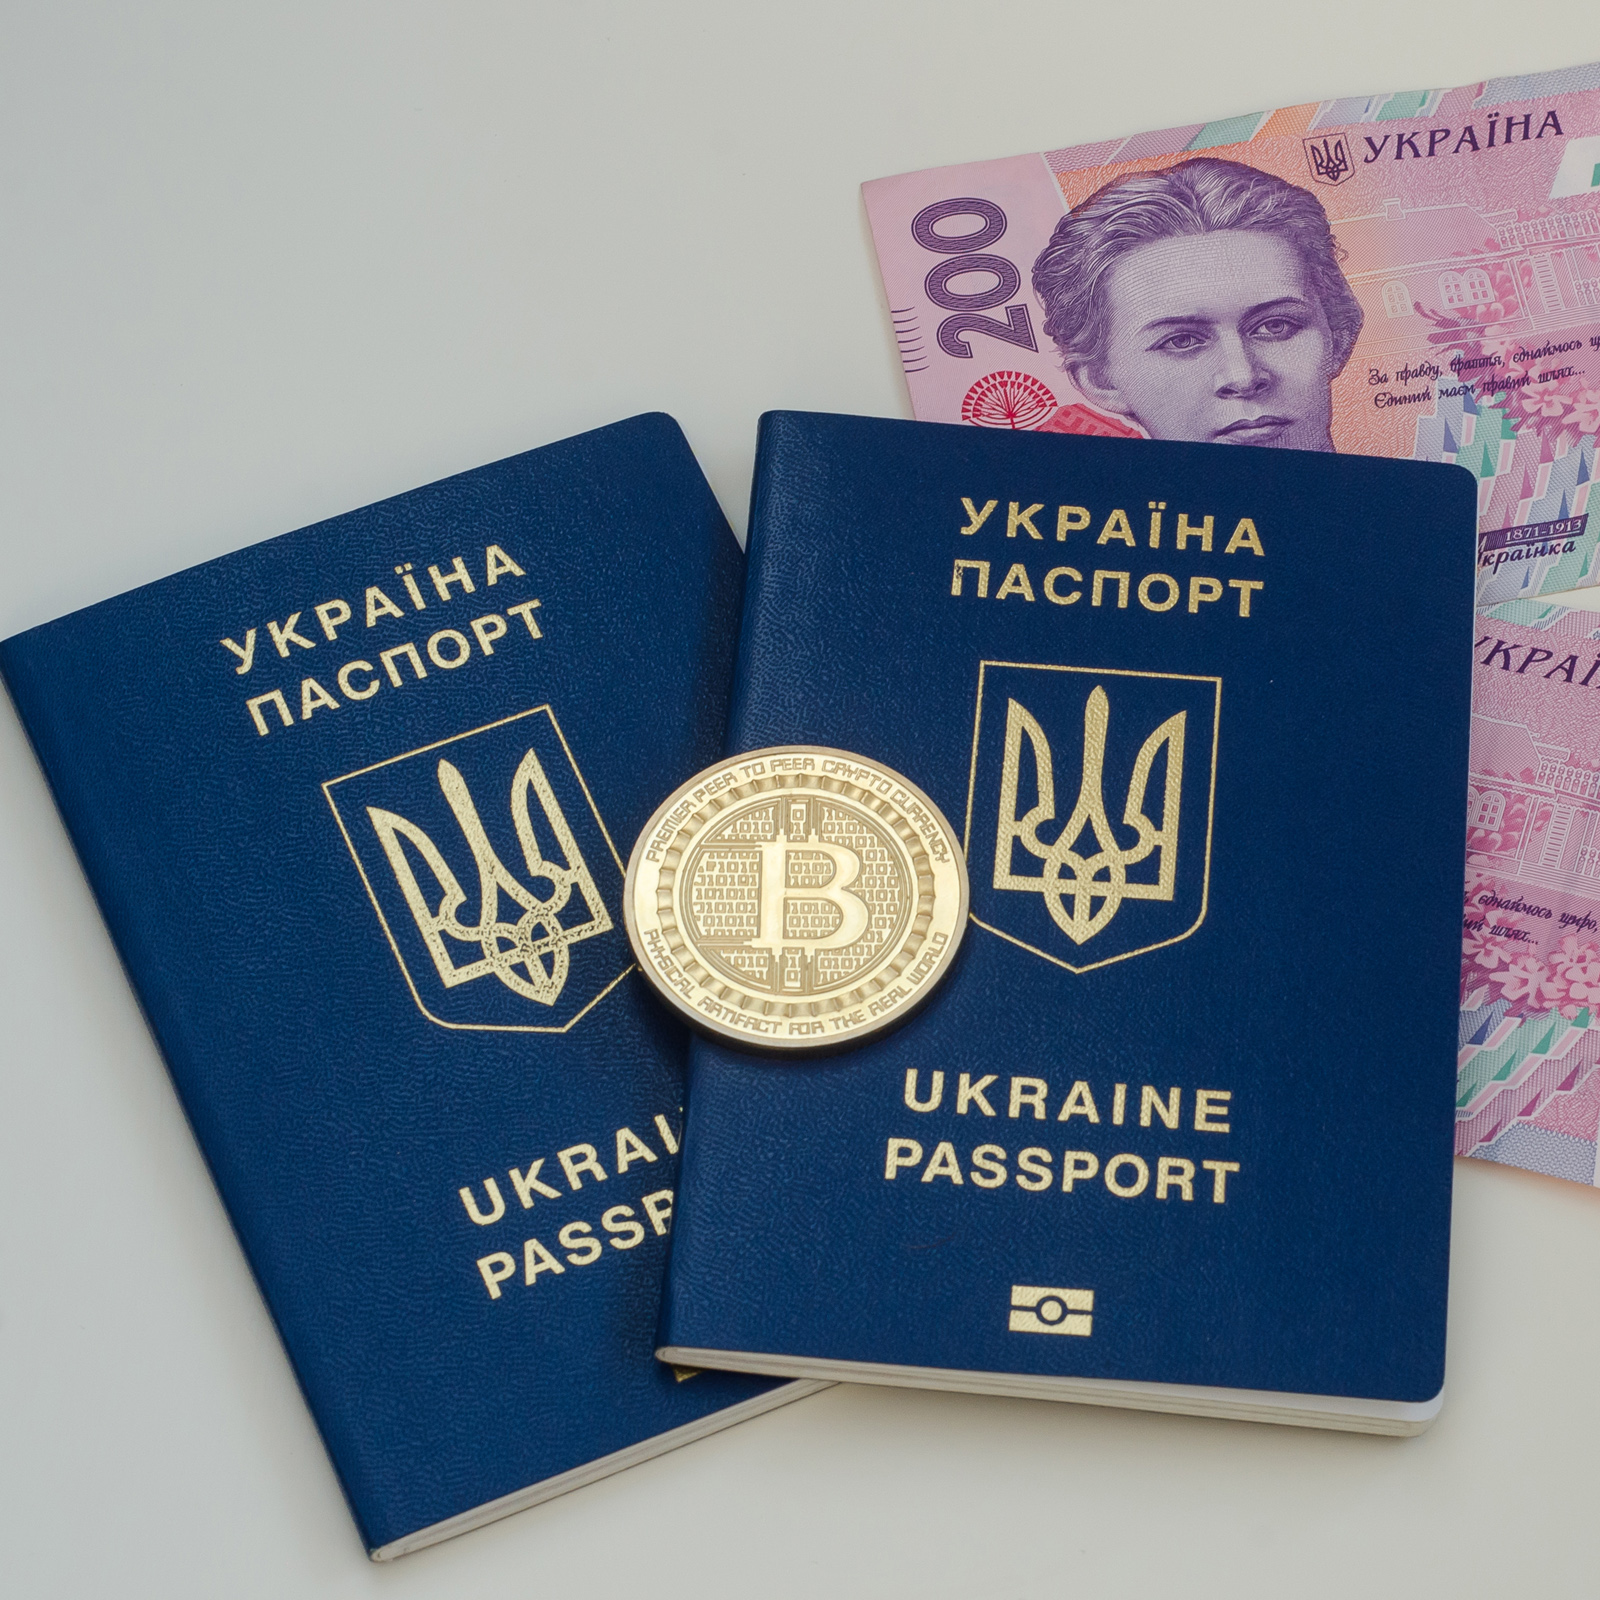 Ukrainians Advised to Pay 19.5% Tax on Crypto Incomes